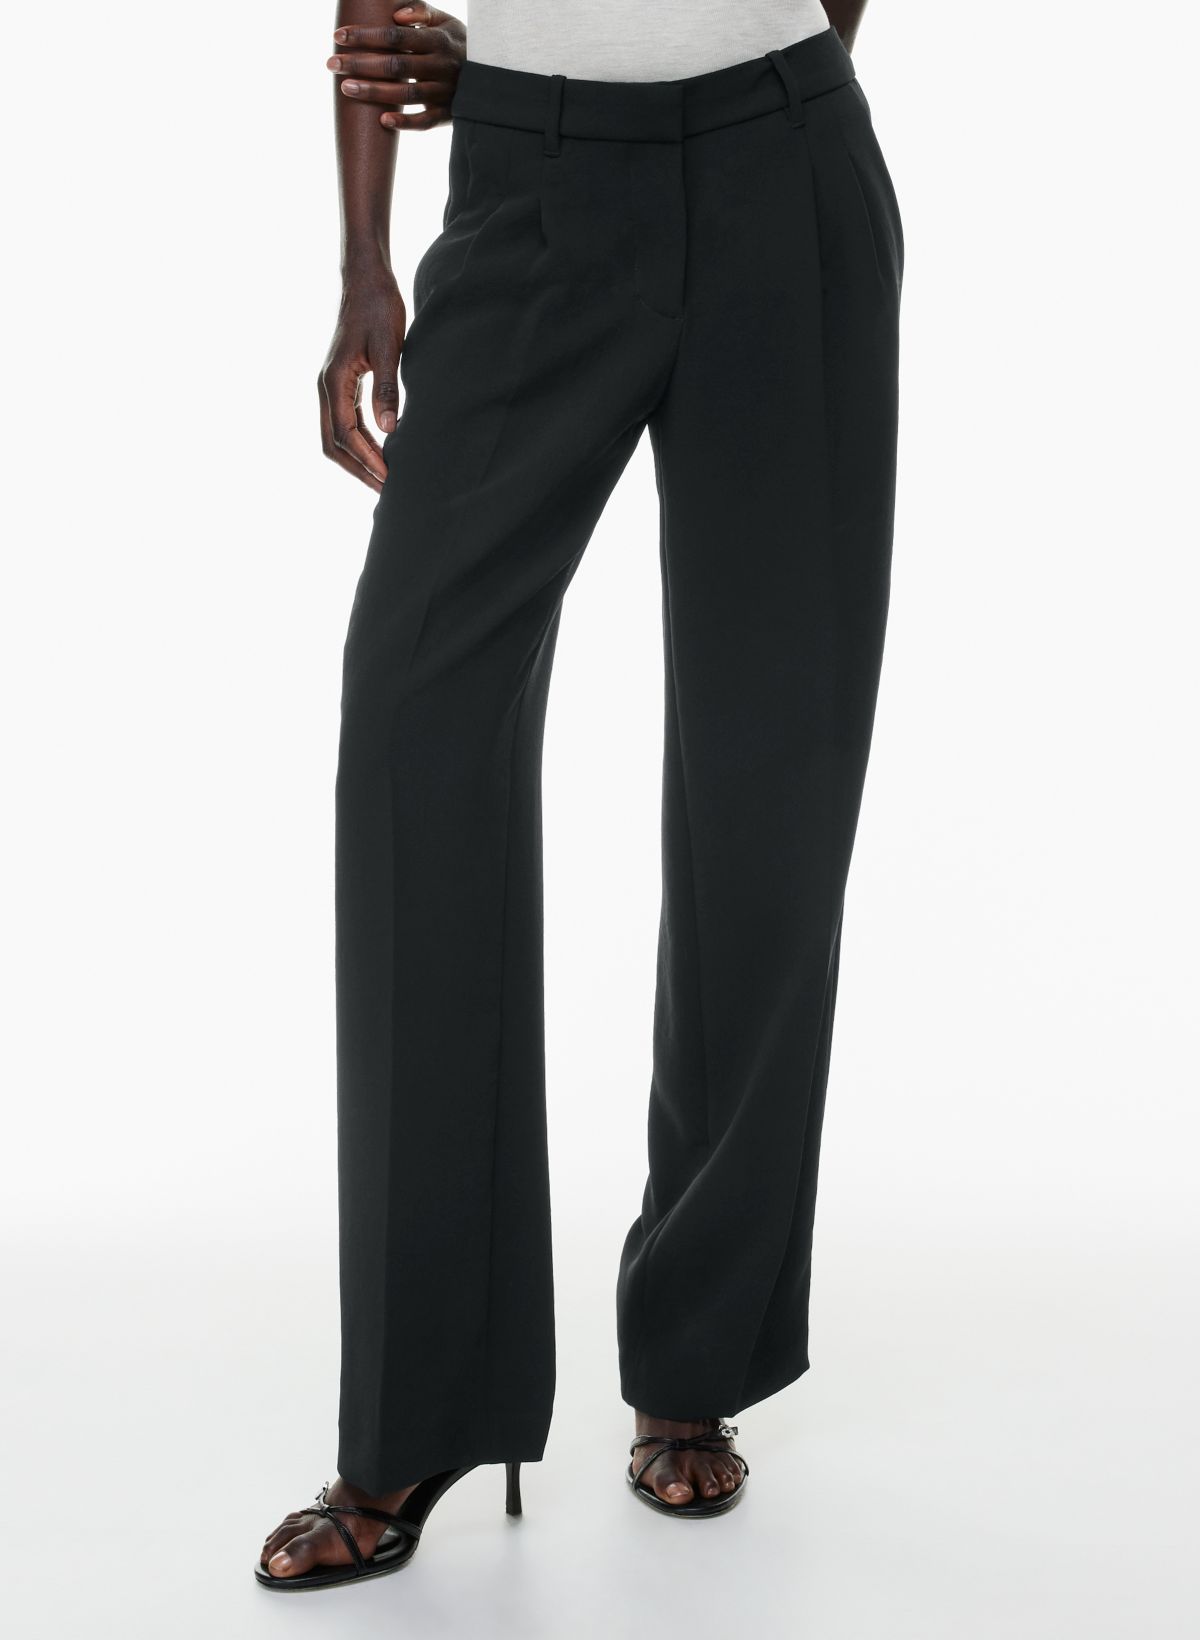 Larissa Trousers - Linen Look Mid Waisted Relaxed Straight Leg